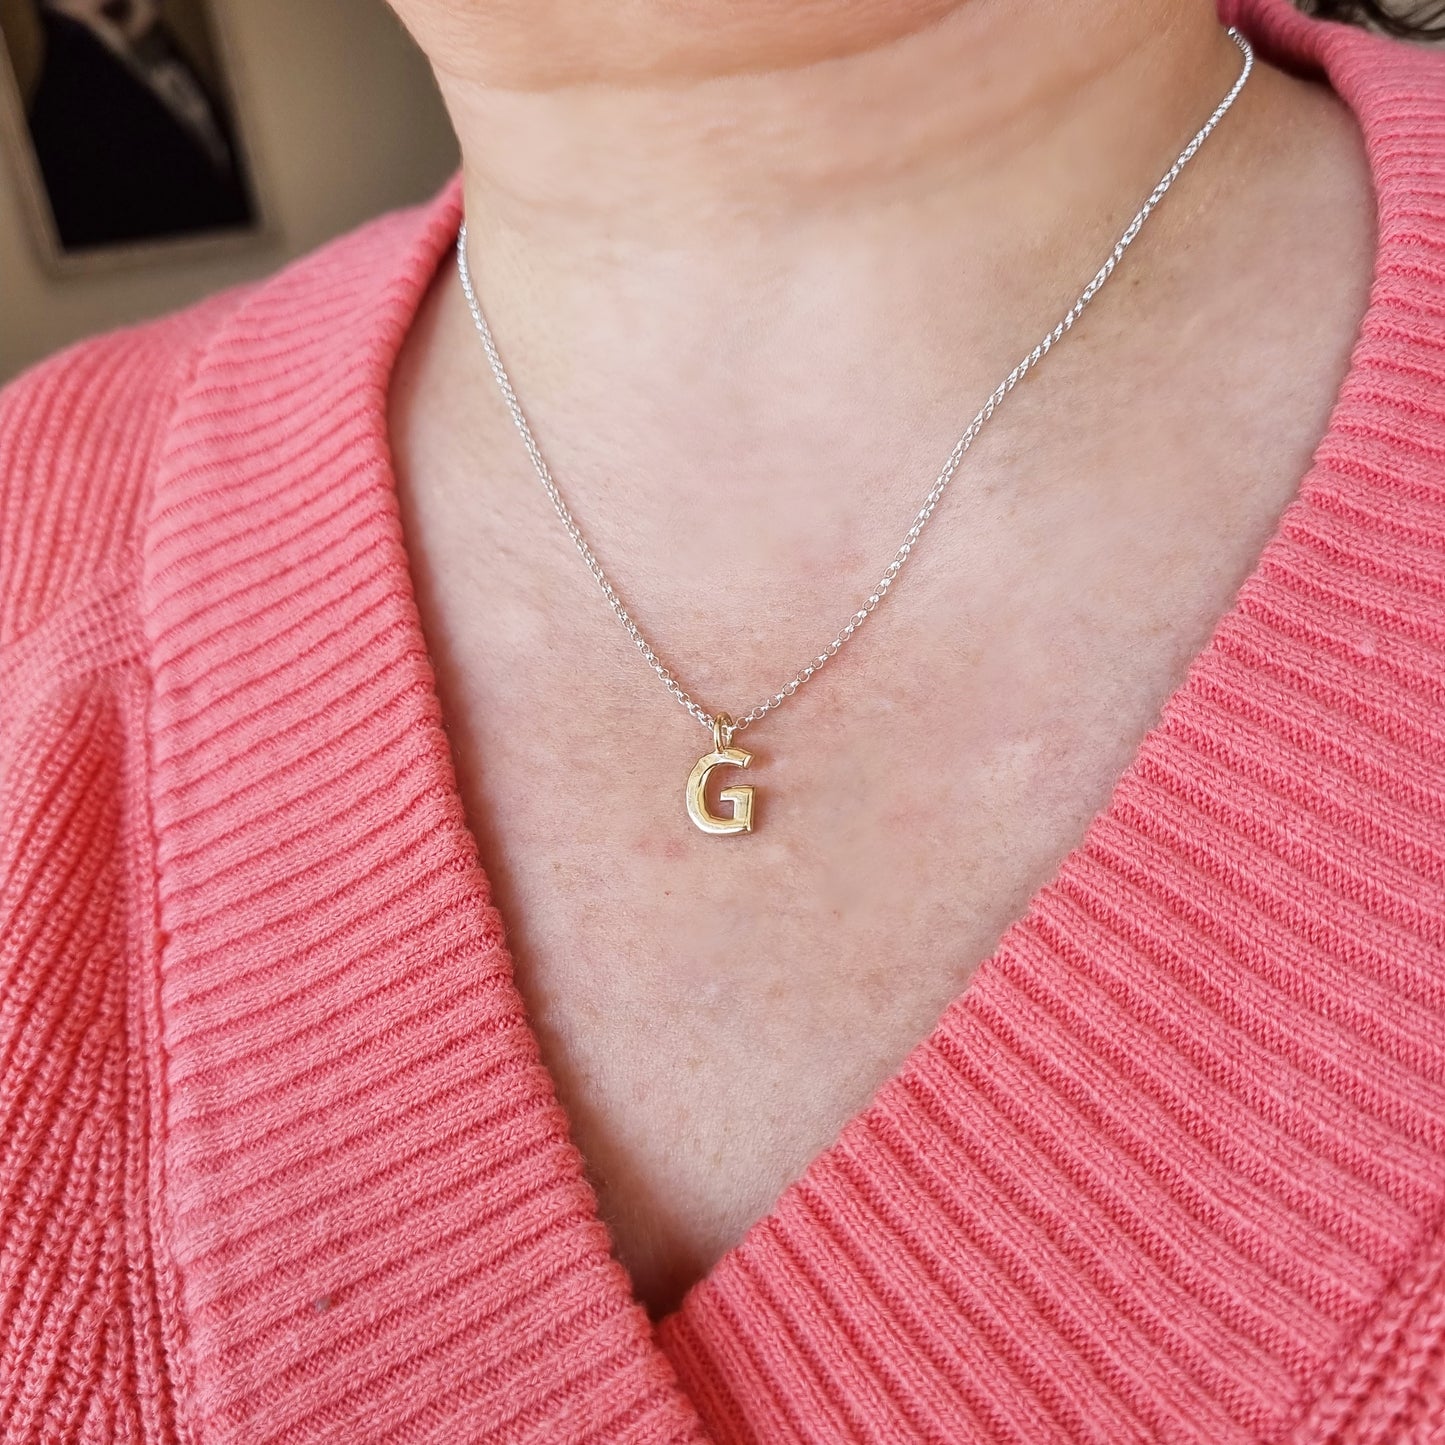 Silver or gold initial necklace